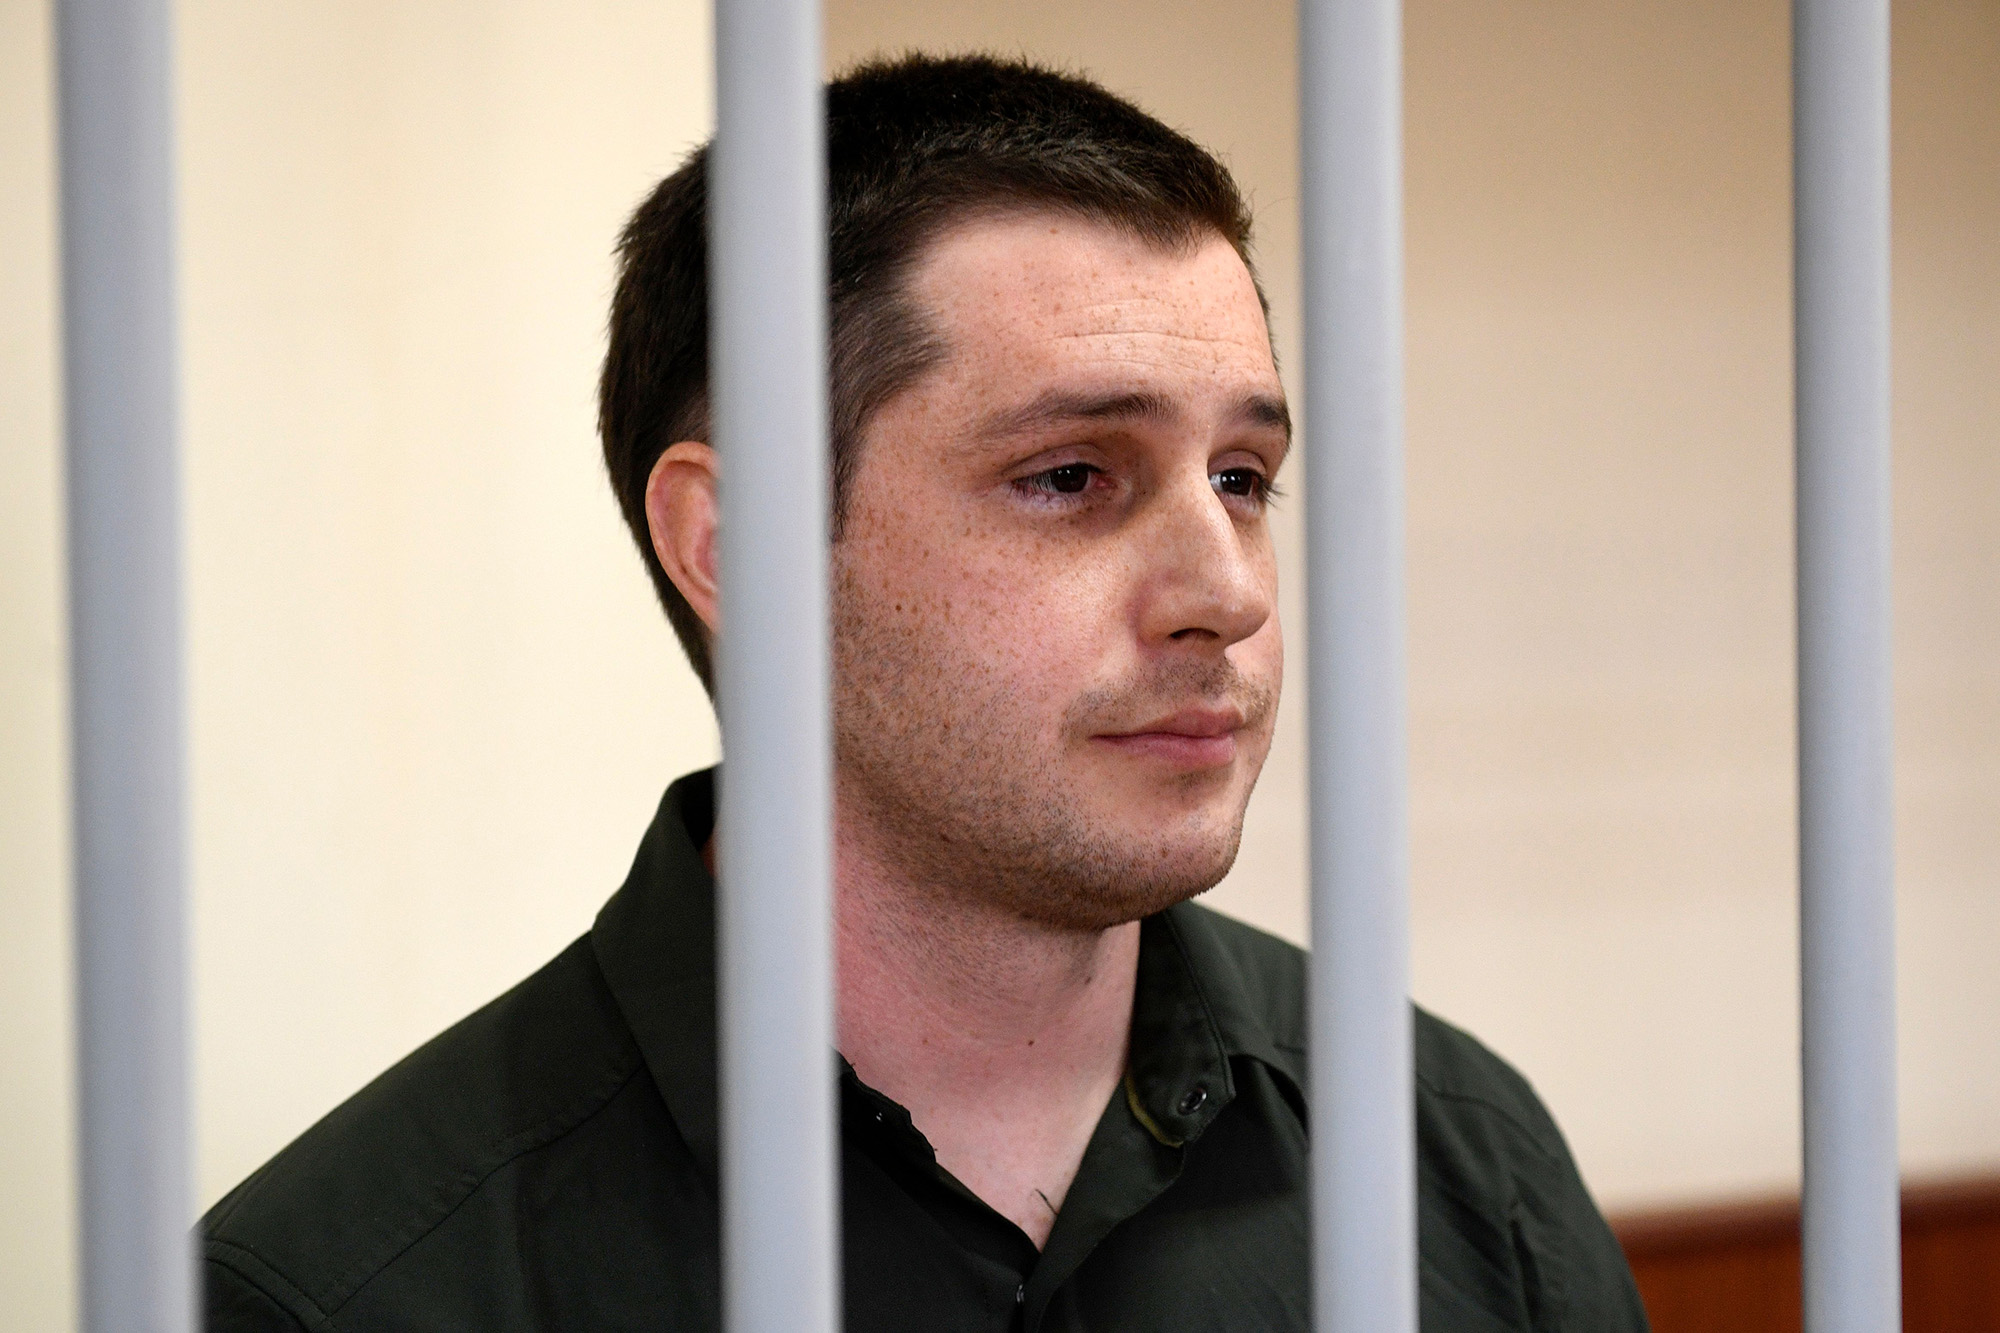 US ex-marine Trevor Reed, charged with attacking police, stands inside a defendants' cage during a court hearing in Moscow, Russia, on March 11, 2020.